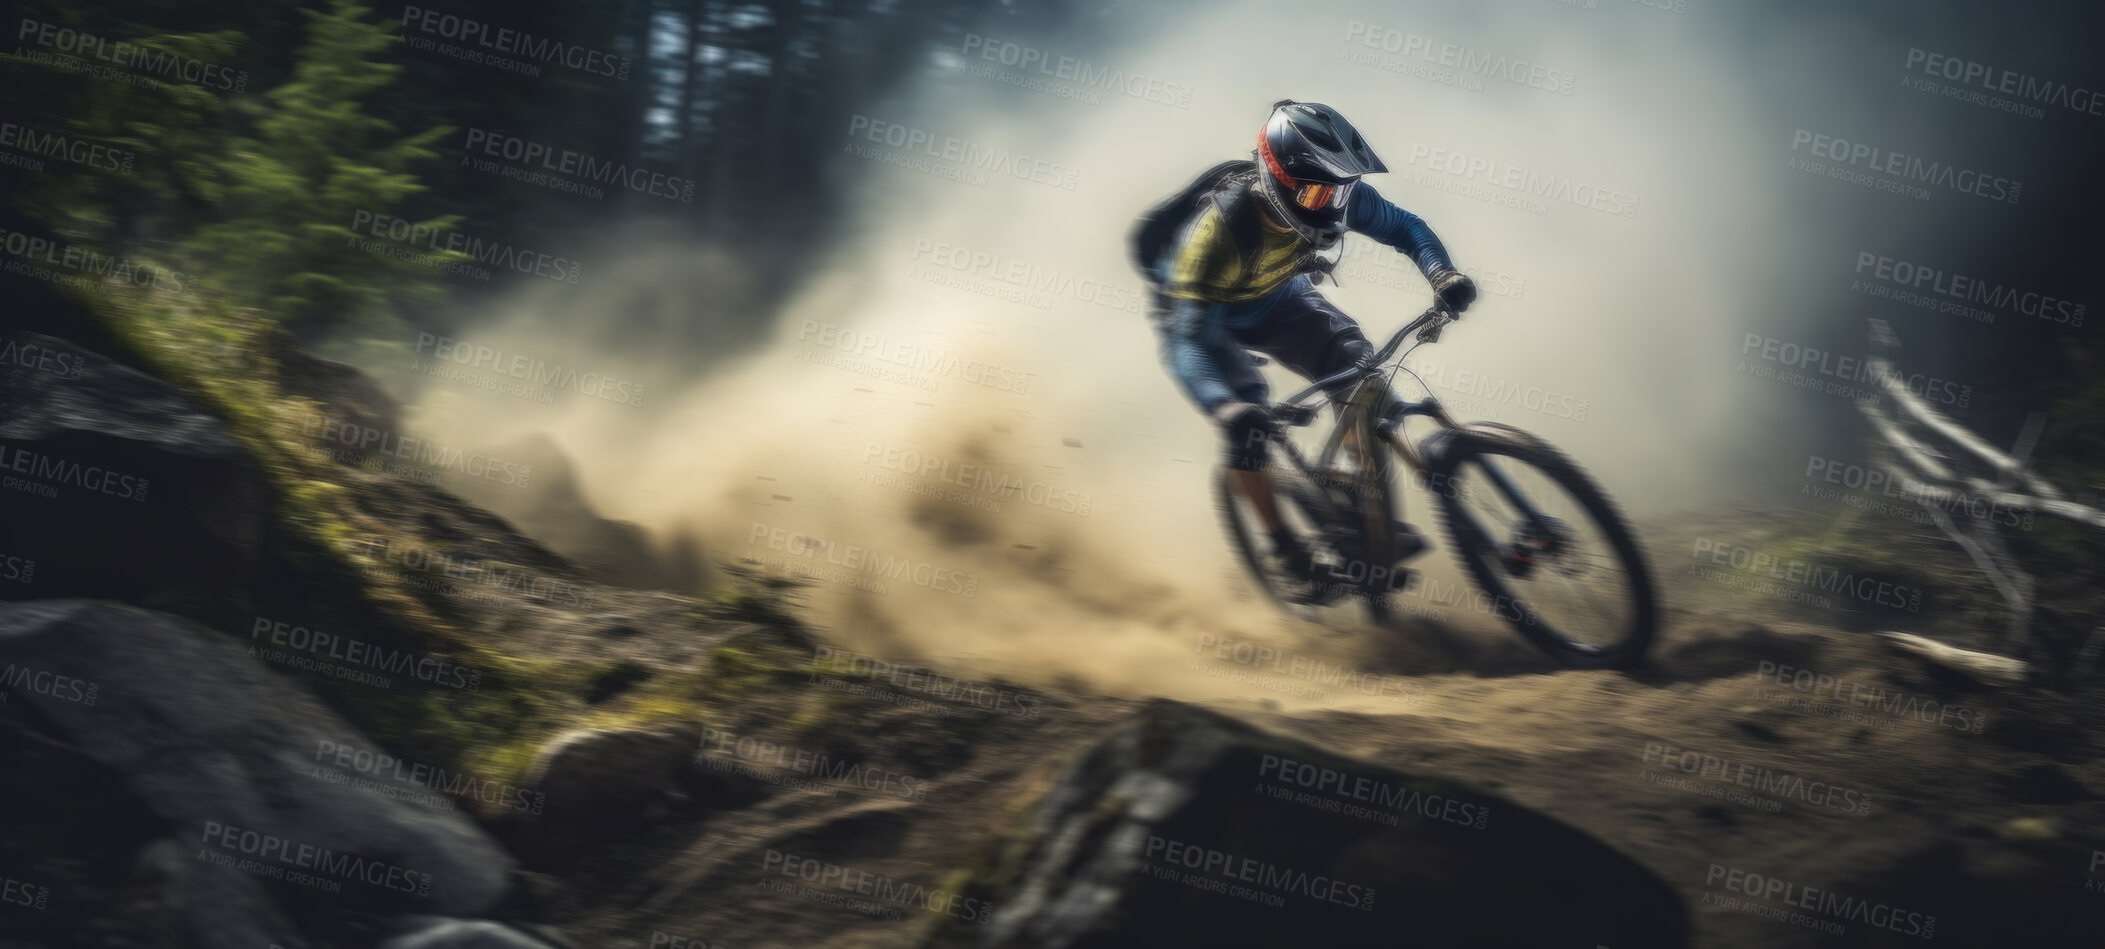 Buy stock photo Fit mountain biker speeding downhill on a bike track in the forest or woods. Extreme sport